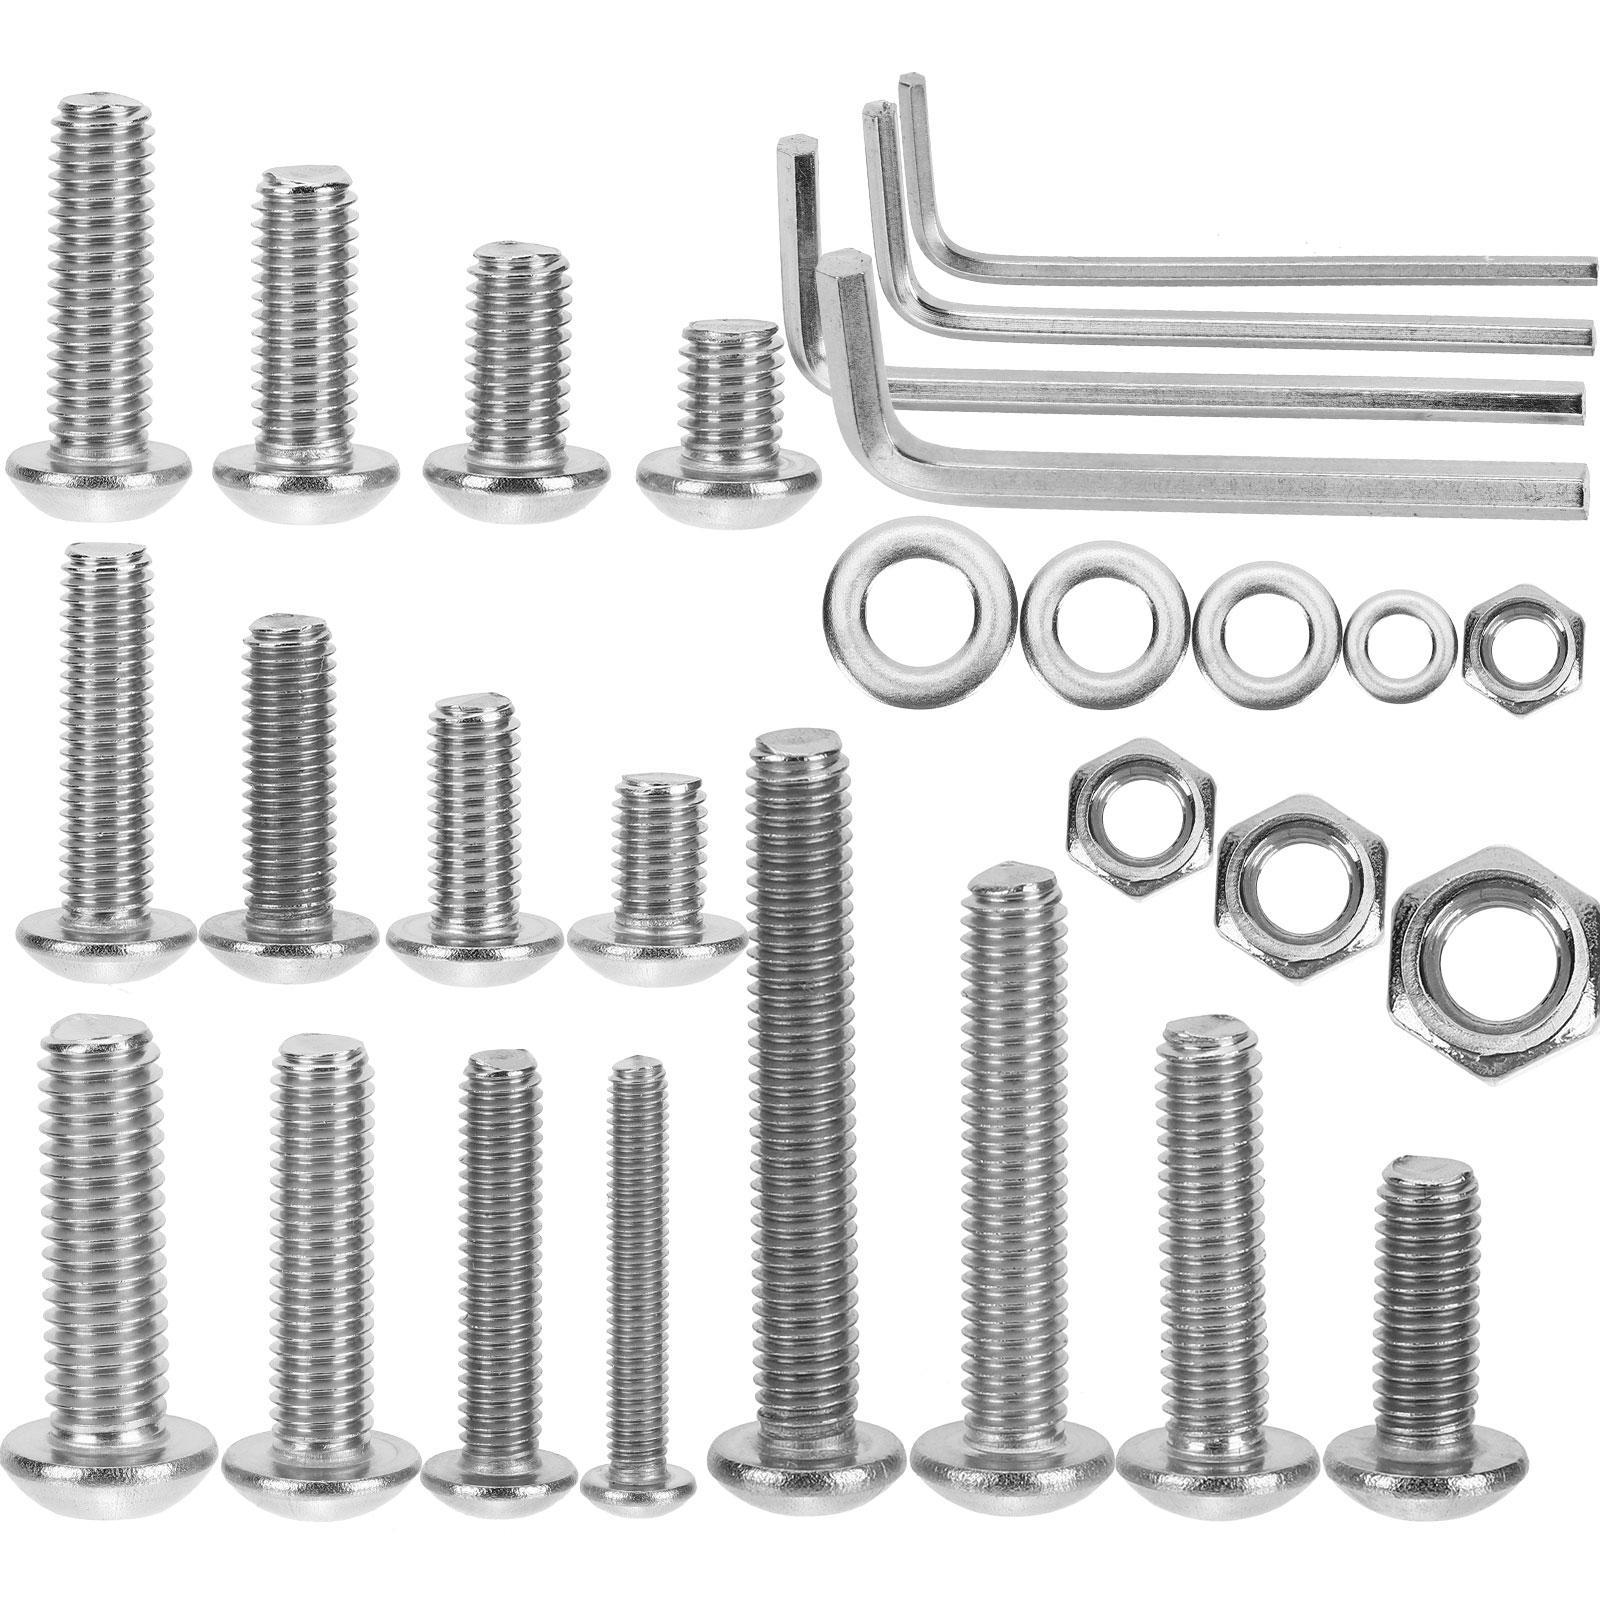 520 Pcs Bolts Washer Hex Set Stainless Nuts Kit Steel Lug